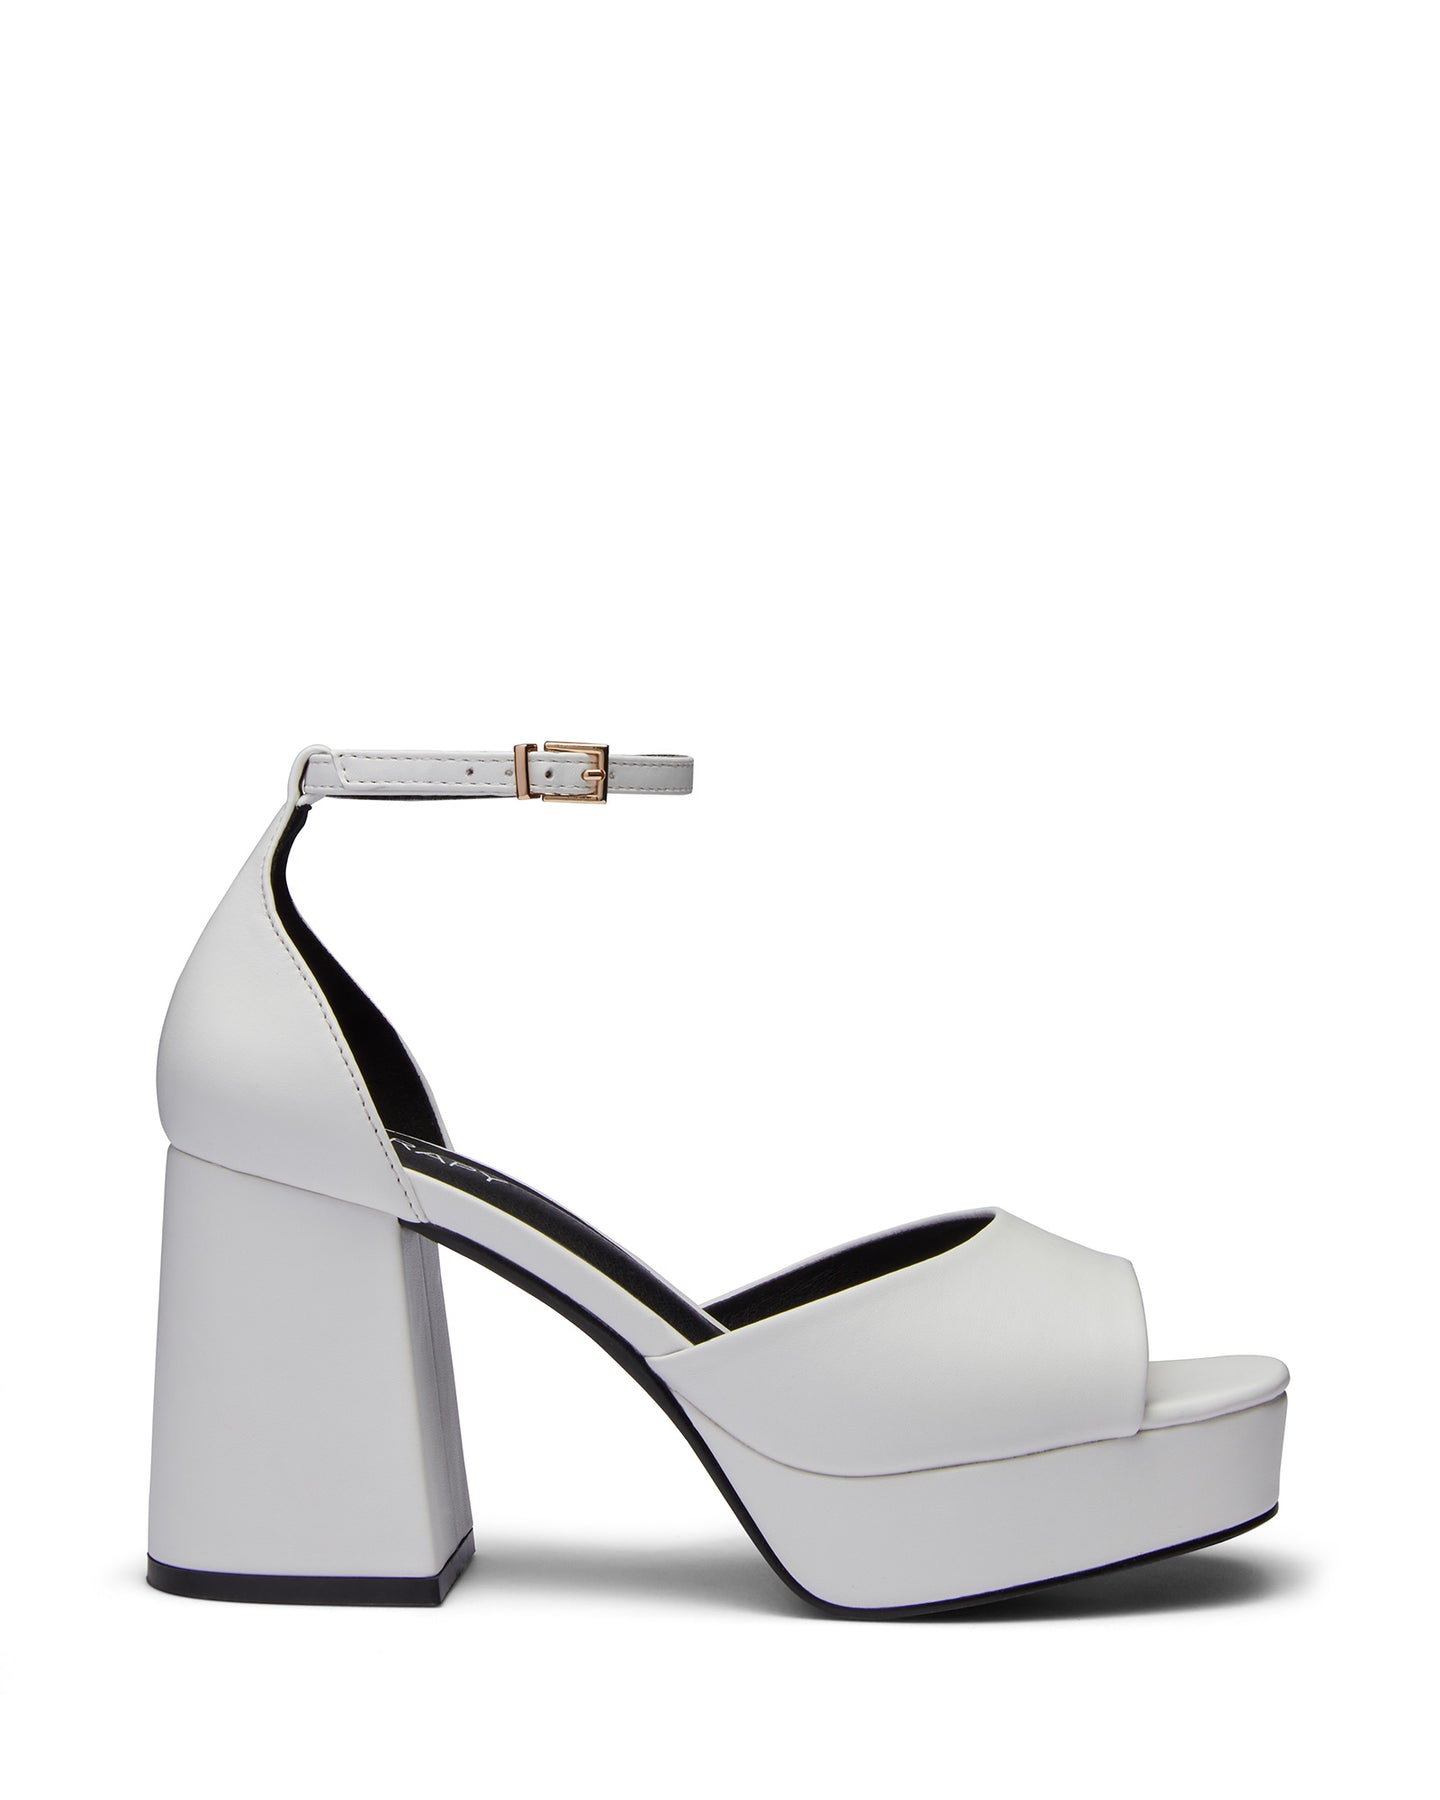 Therapy Shoes Sharp White Smooth | Women's Heels | Pumps | Slingback